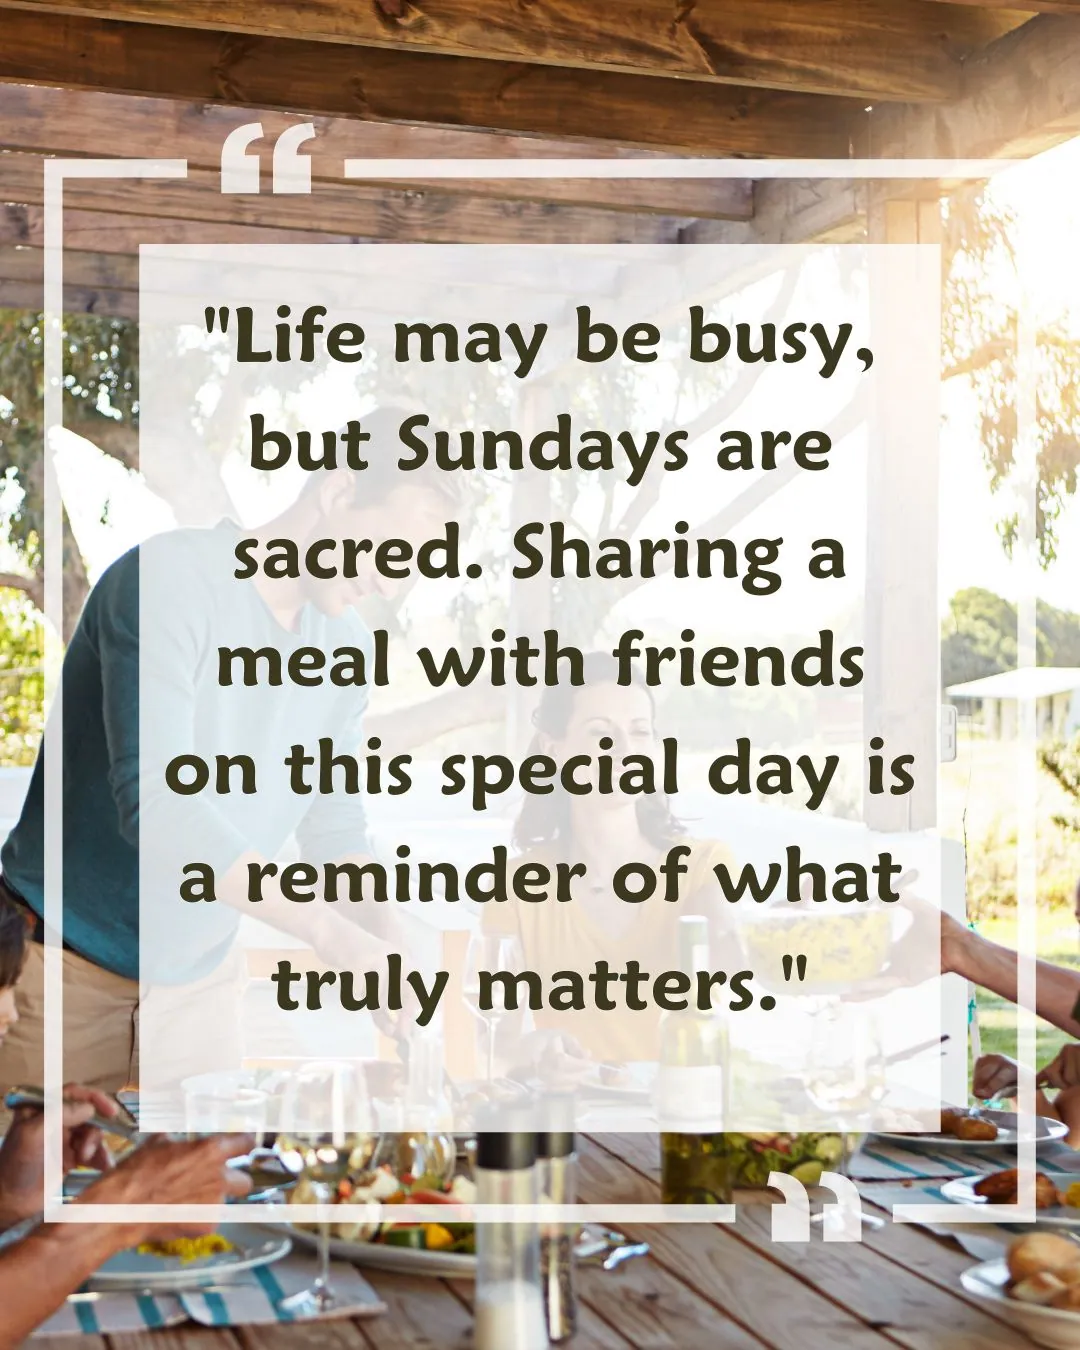 Sunday Lunch with friends quote with Image 1